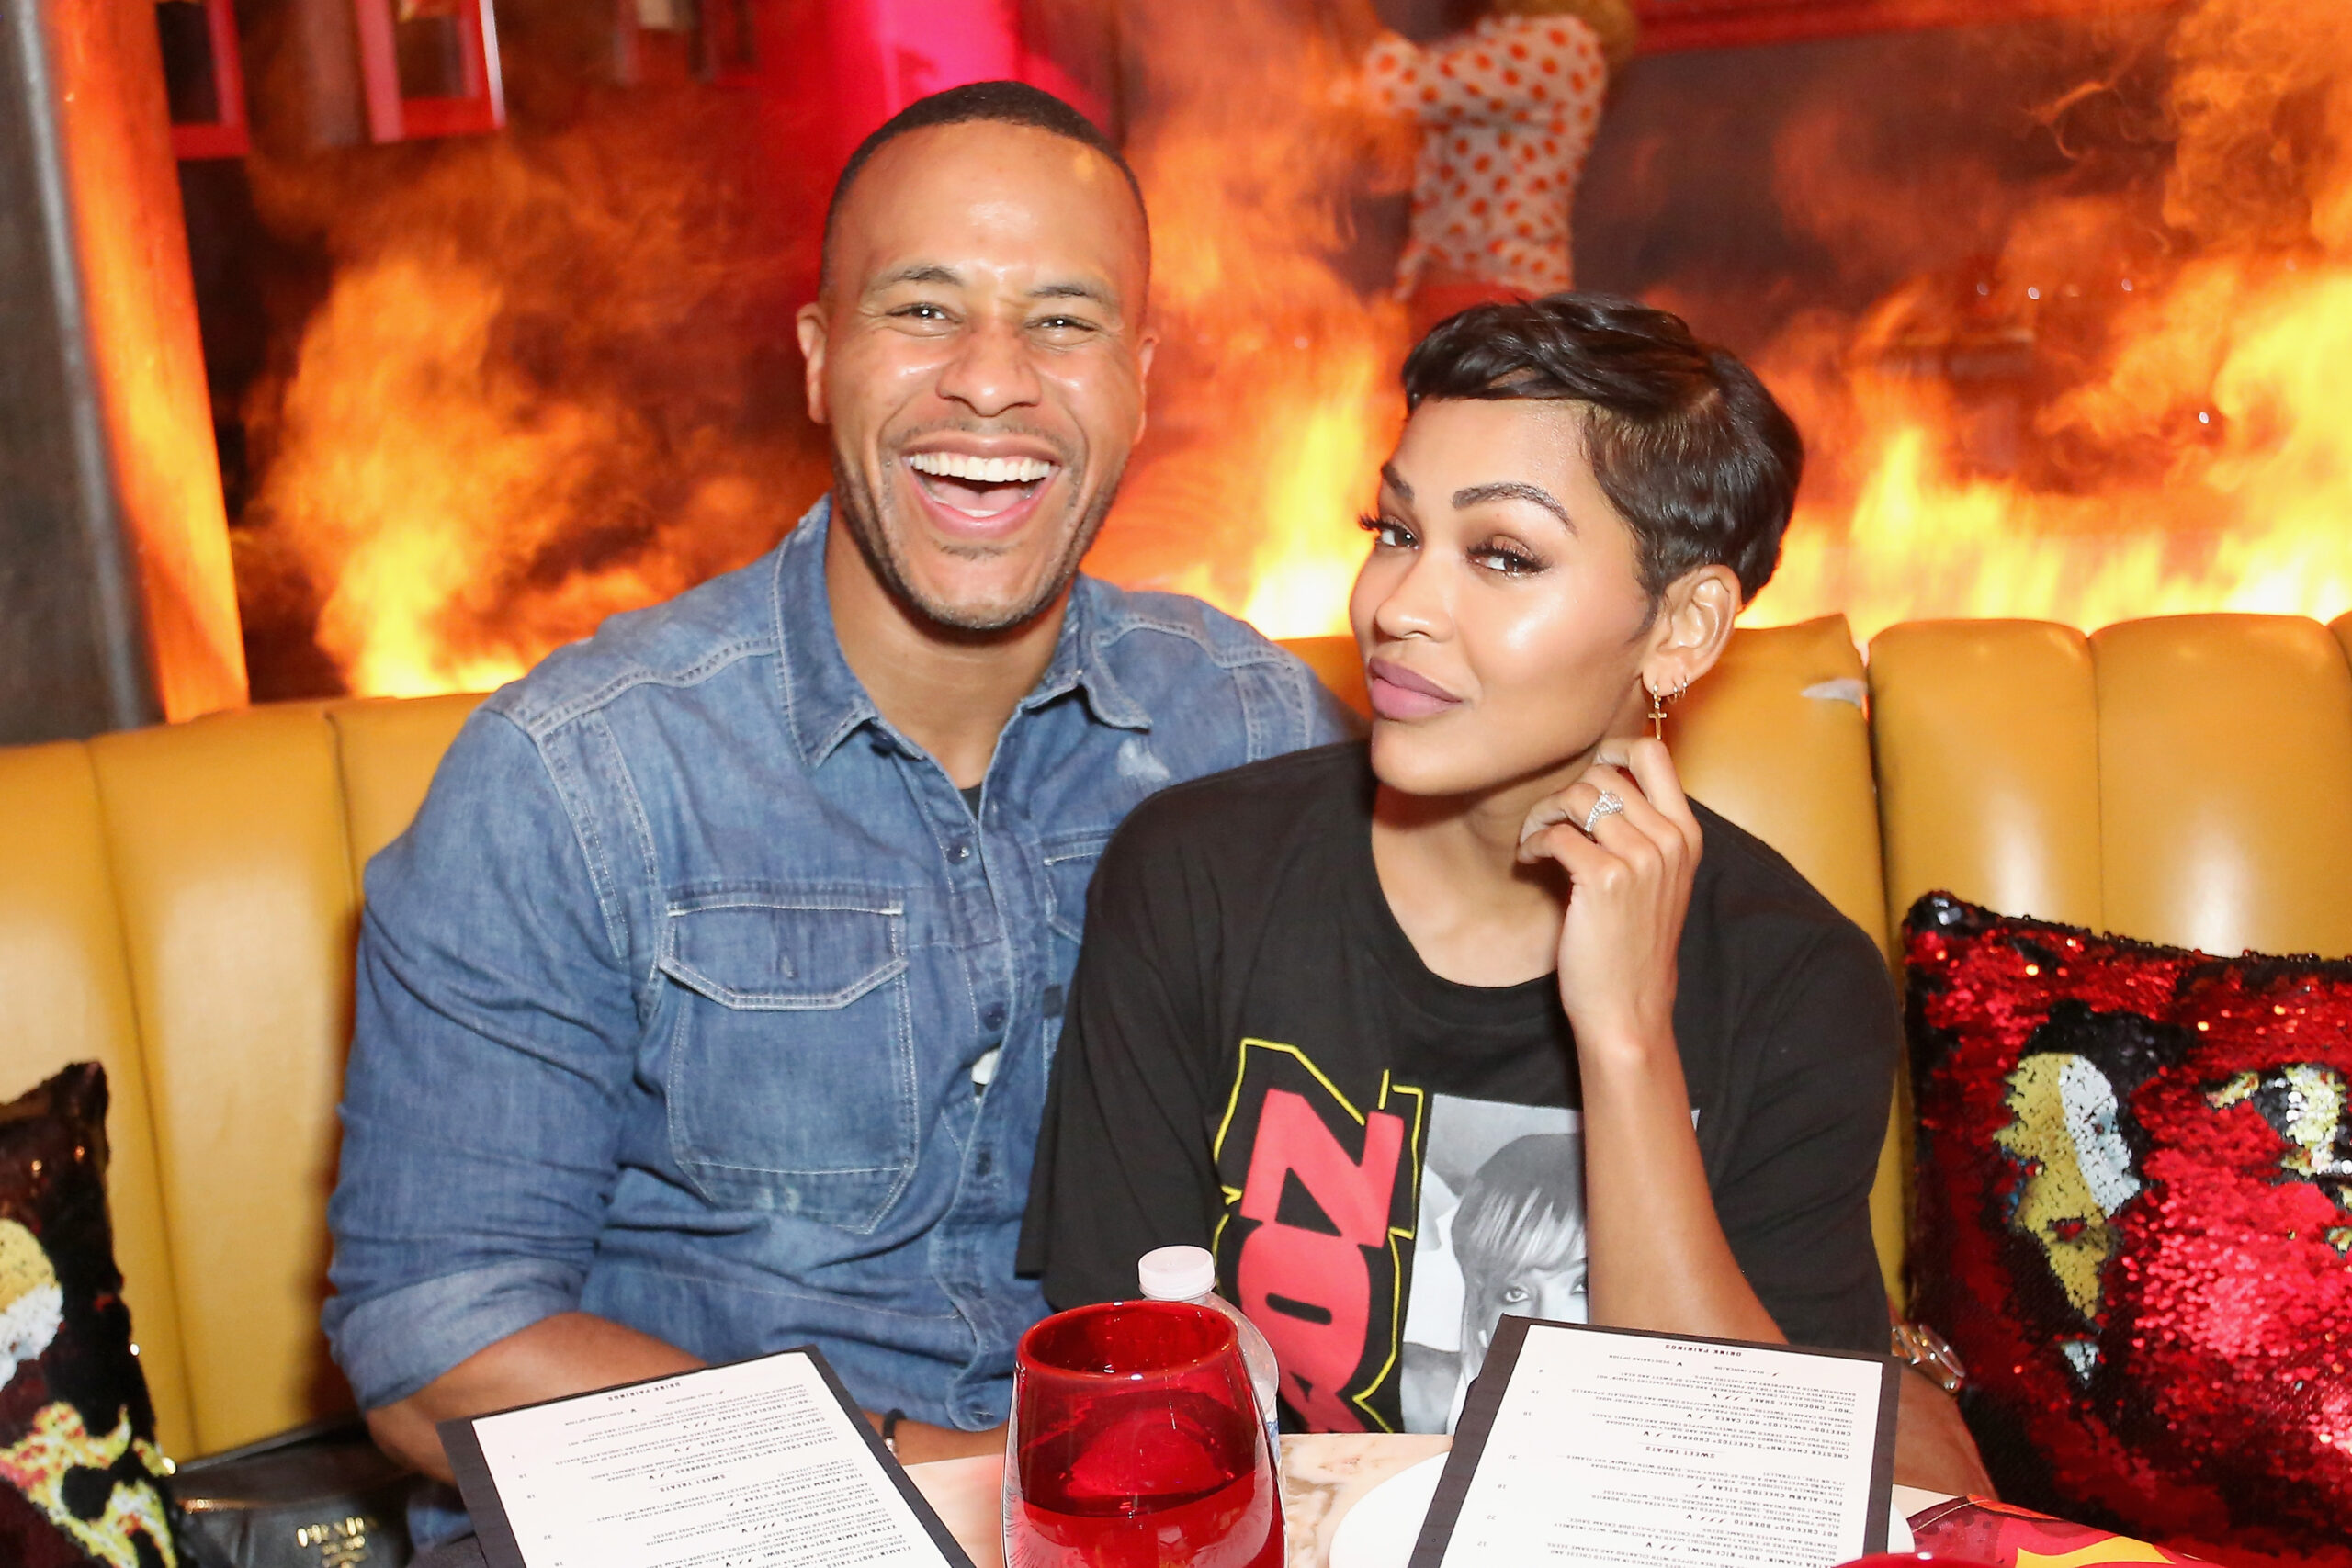 DeVon Franklin Says Hes Resisting Temptation to Place Blame Amid Divorce from Meagan Good